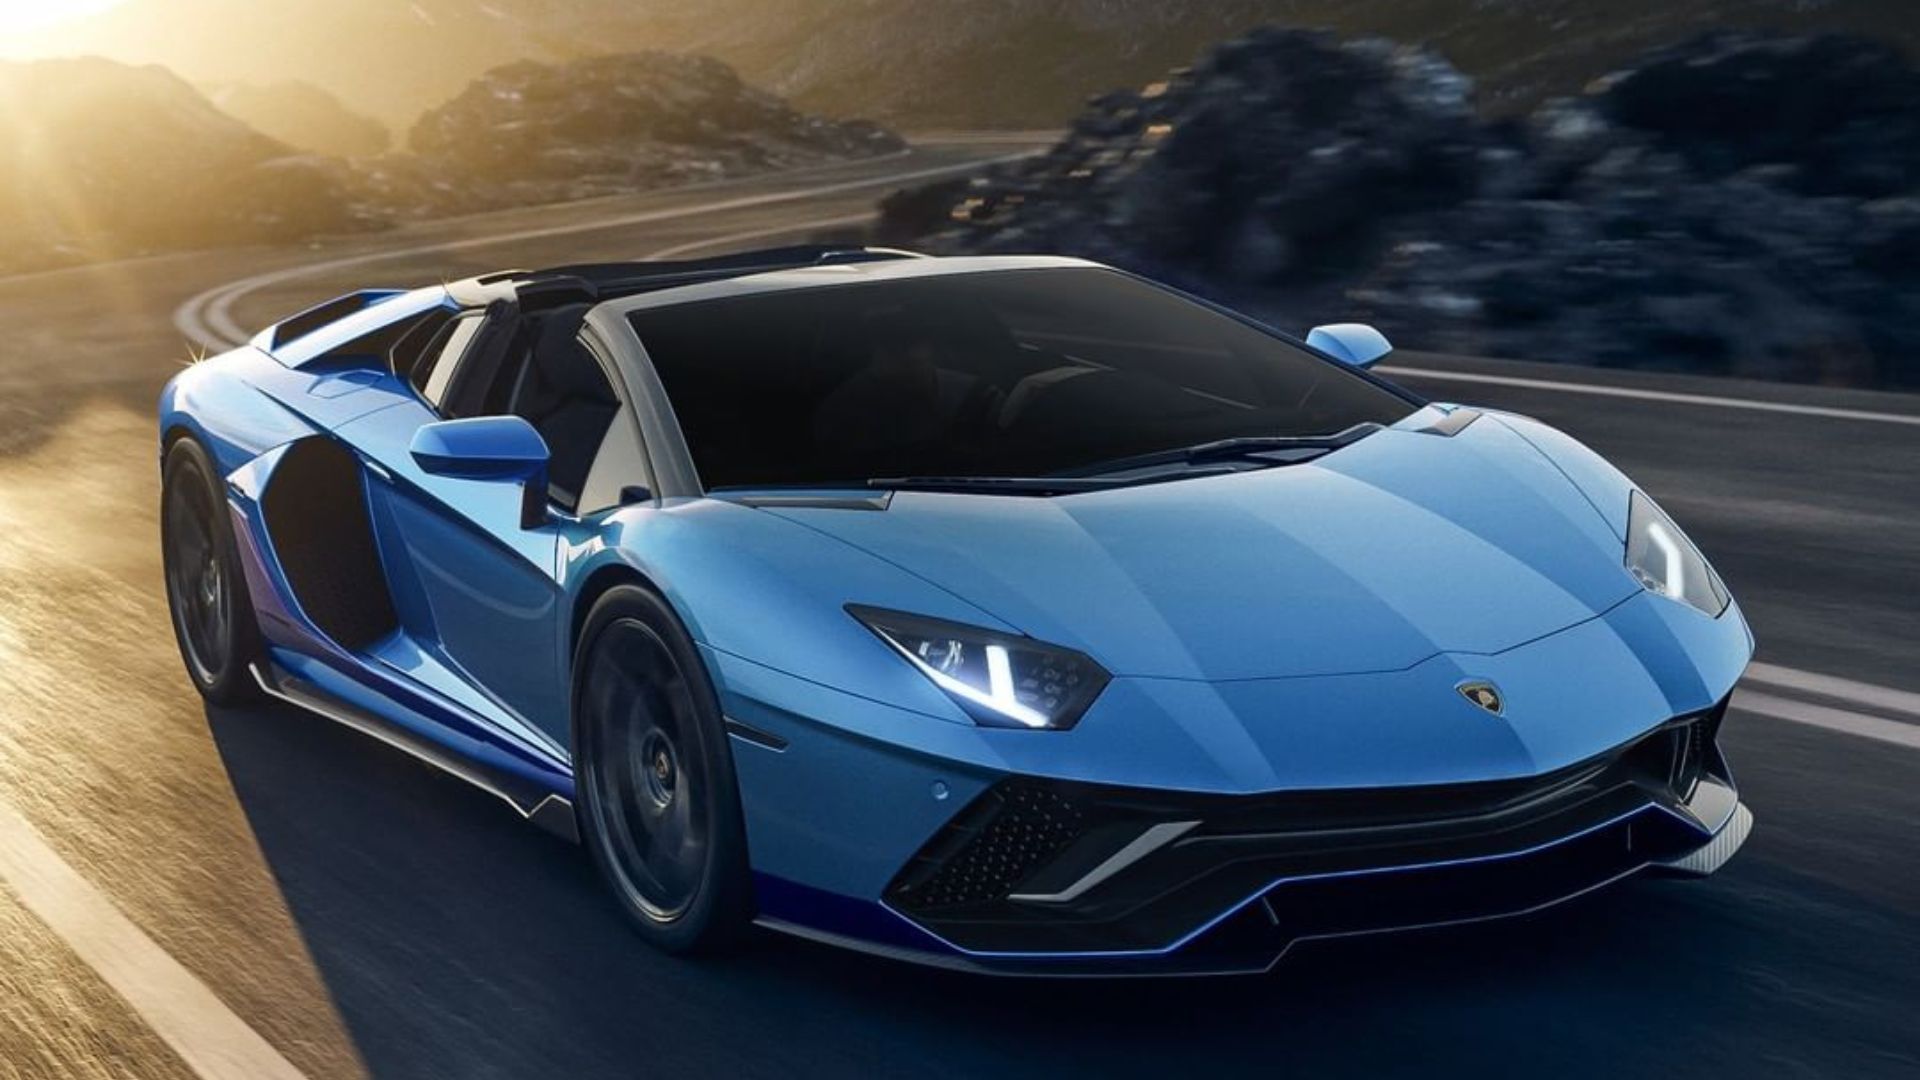 Expensive things owned by Lisa: Lamborghini Aventador